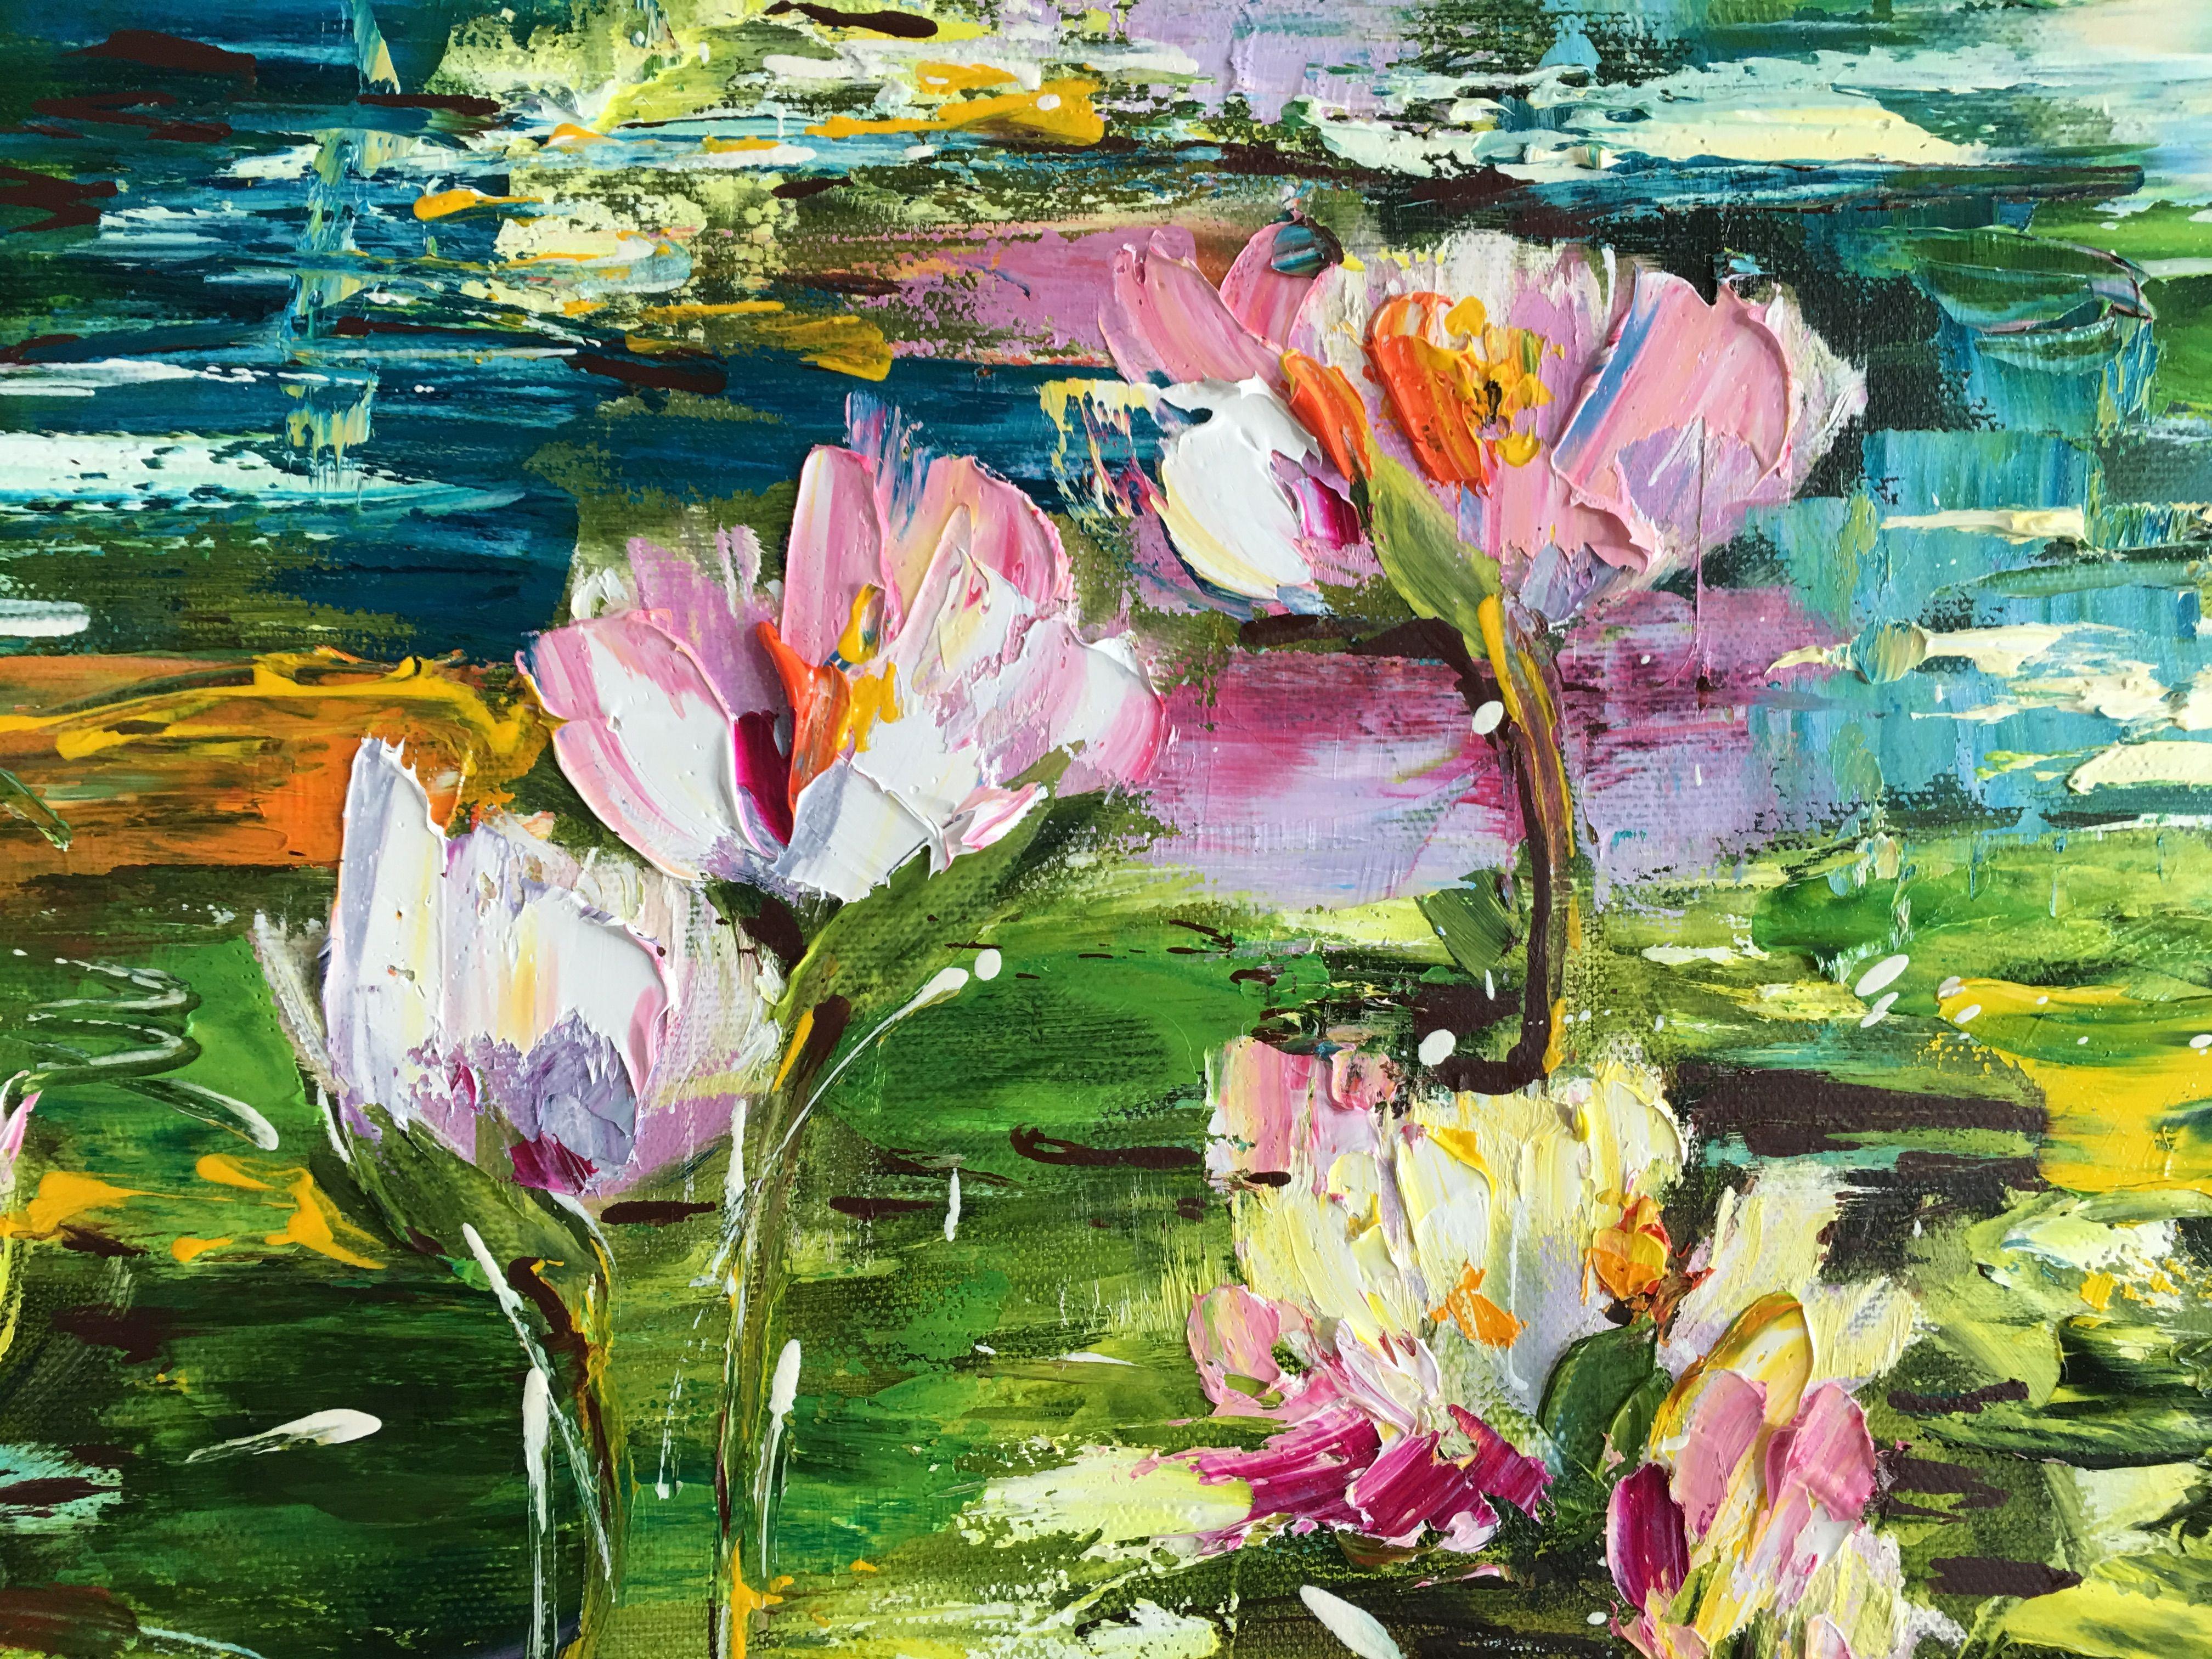 Pond with Water Lilies, Painting, Oil on Canvas 2